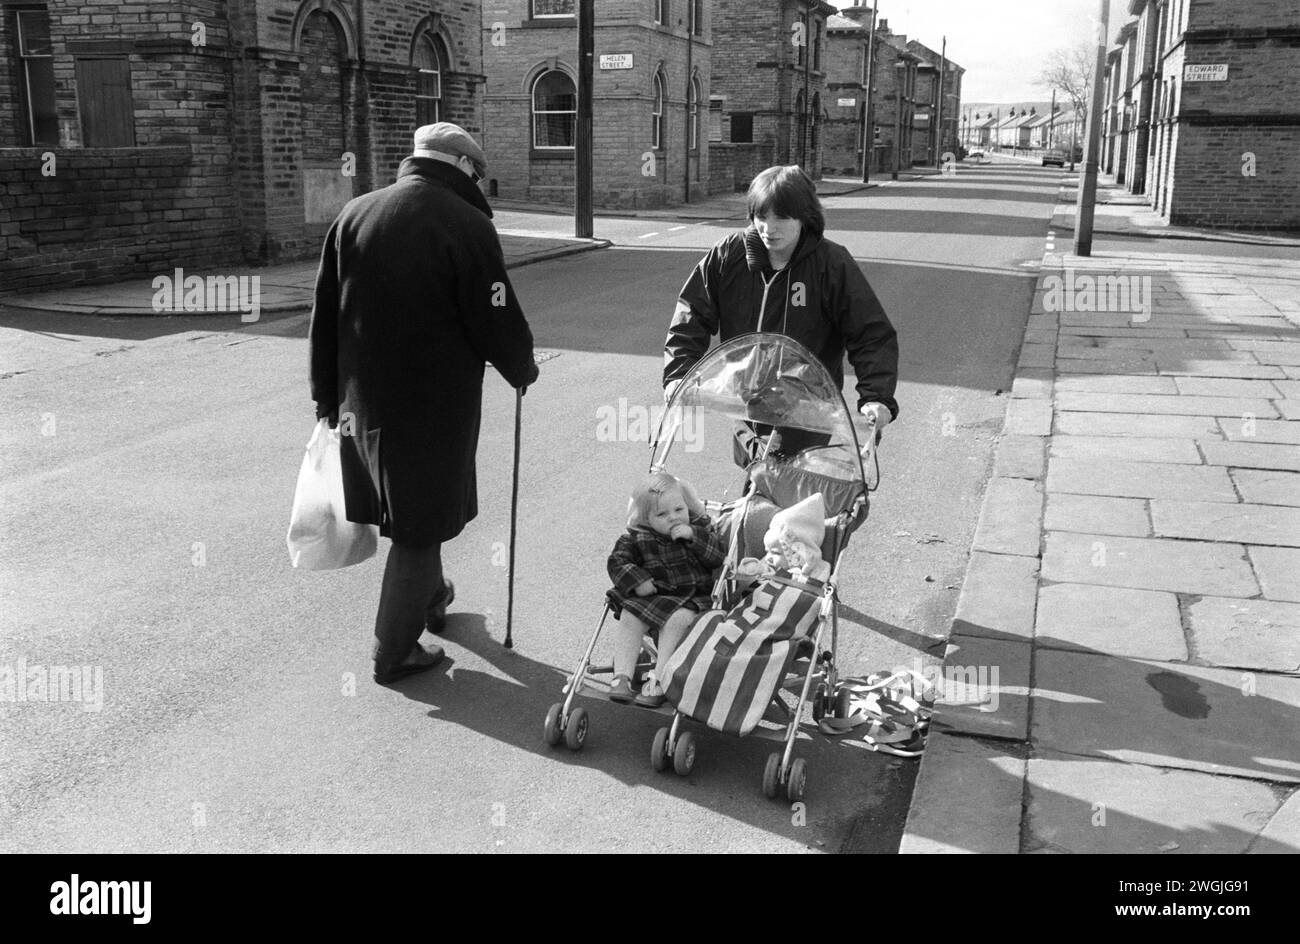 Mother pushing pram in road 1989s UK. Cobbled pavement makes the pram shake, old man walking in road for safety, he’s afraid of falling on uneven pavement. No cars no yellow lines.  Shipley, Bradford West Yorkshire England 1981. Saltaire was a Victorian Model village built around the Salts Mill named after Sir Titus Salt.  It was closed down in 1986  after 133 years as a textile factory. Now a UNESCO World Heritage Site HOMER SYKES Stock Photo